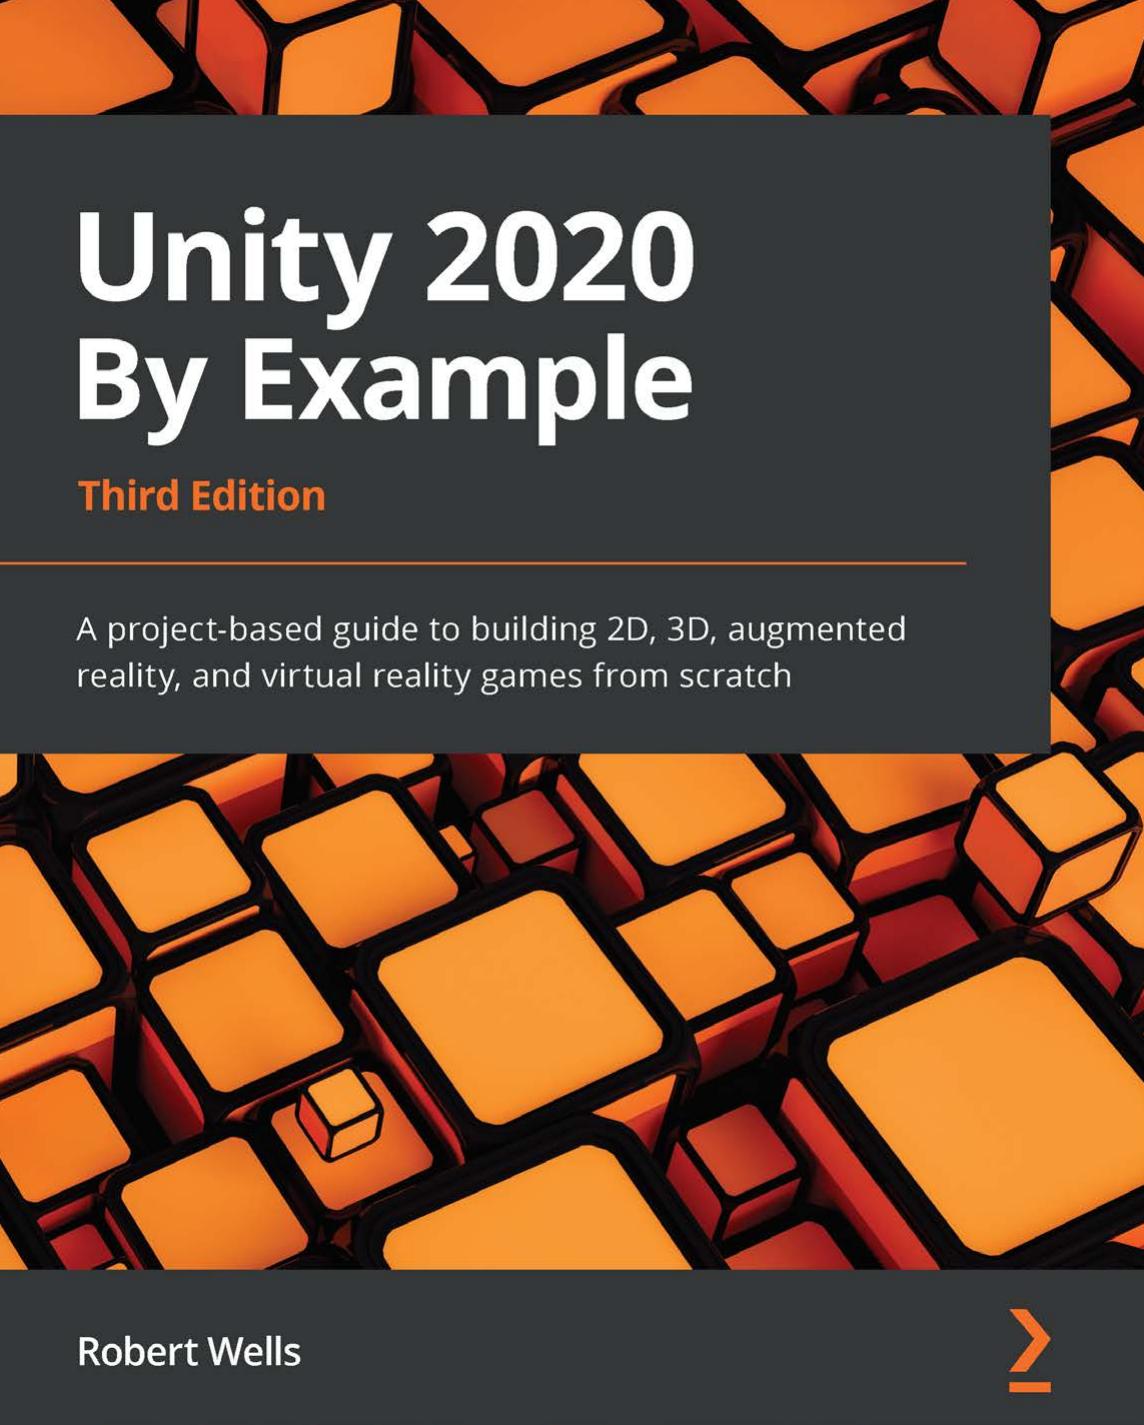 Unity 2020 by Example: A Project-Based Guide to Building 2D, 3D, Augmented Reality, and Virtual Reality Games From Scratch, 3rd Edition